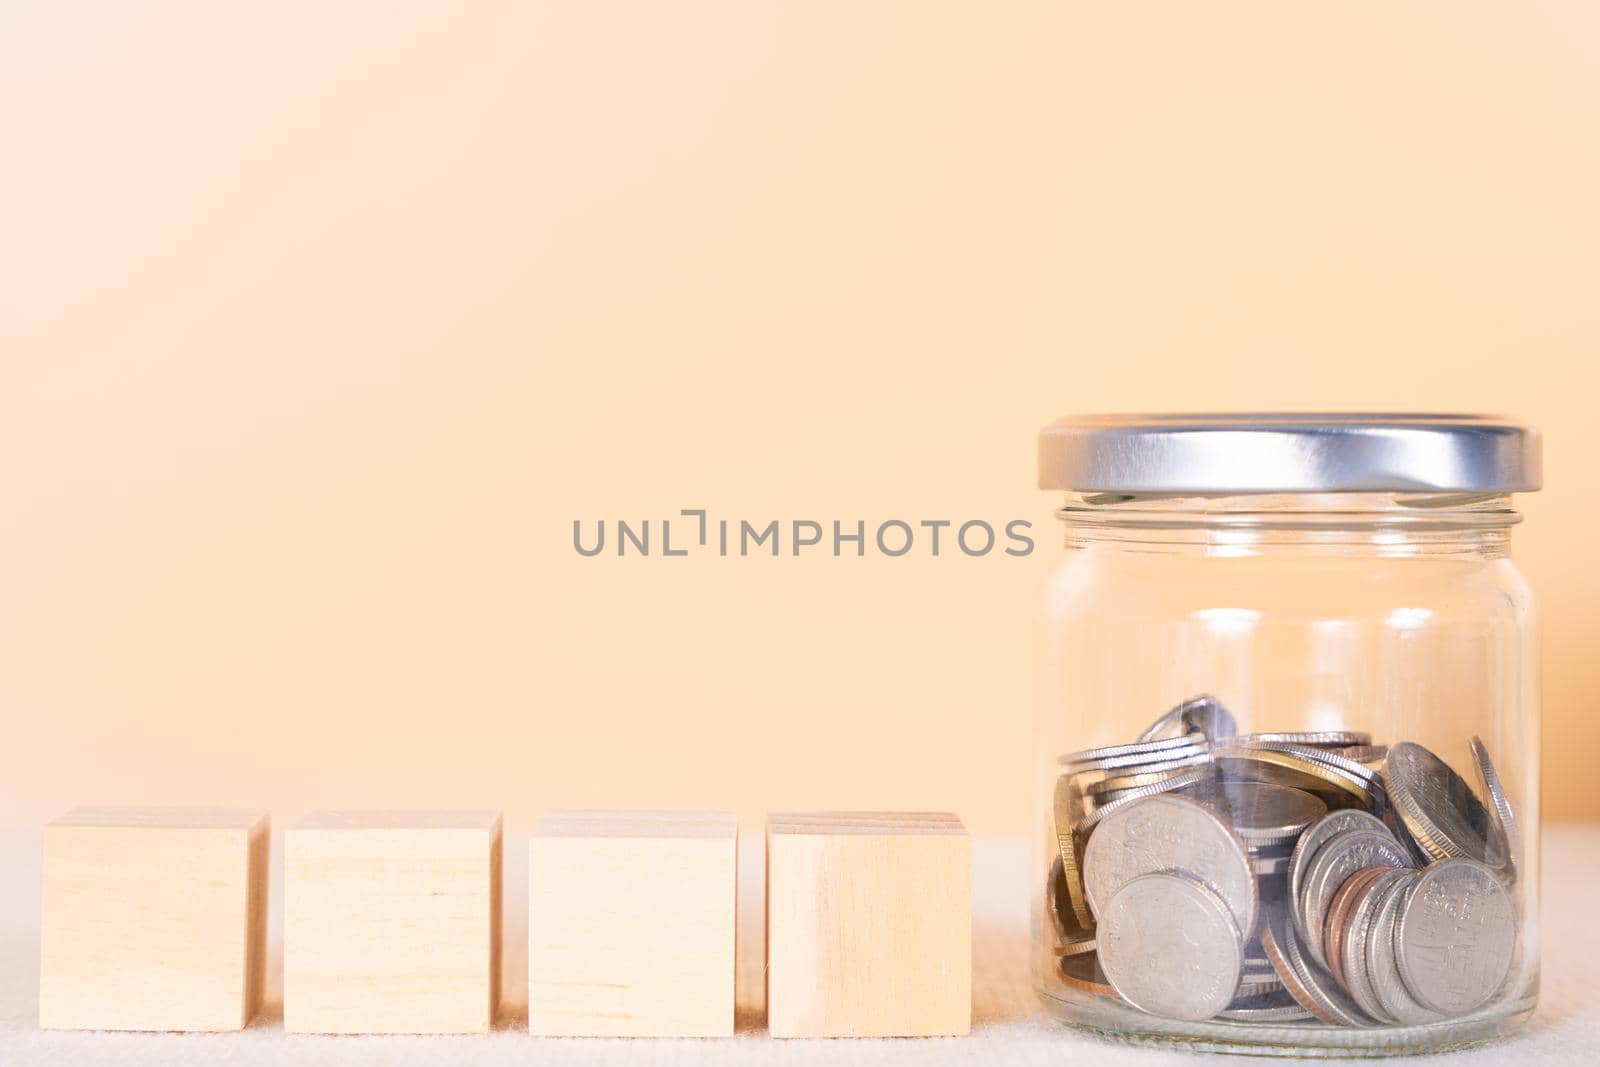 Wooden block and coin inside jar isolated orange background. Saving money and investment concept.